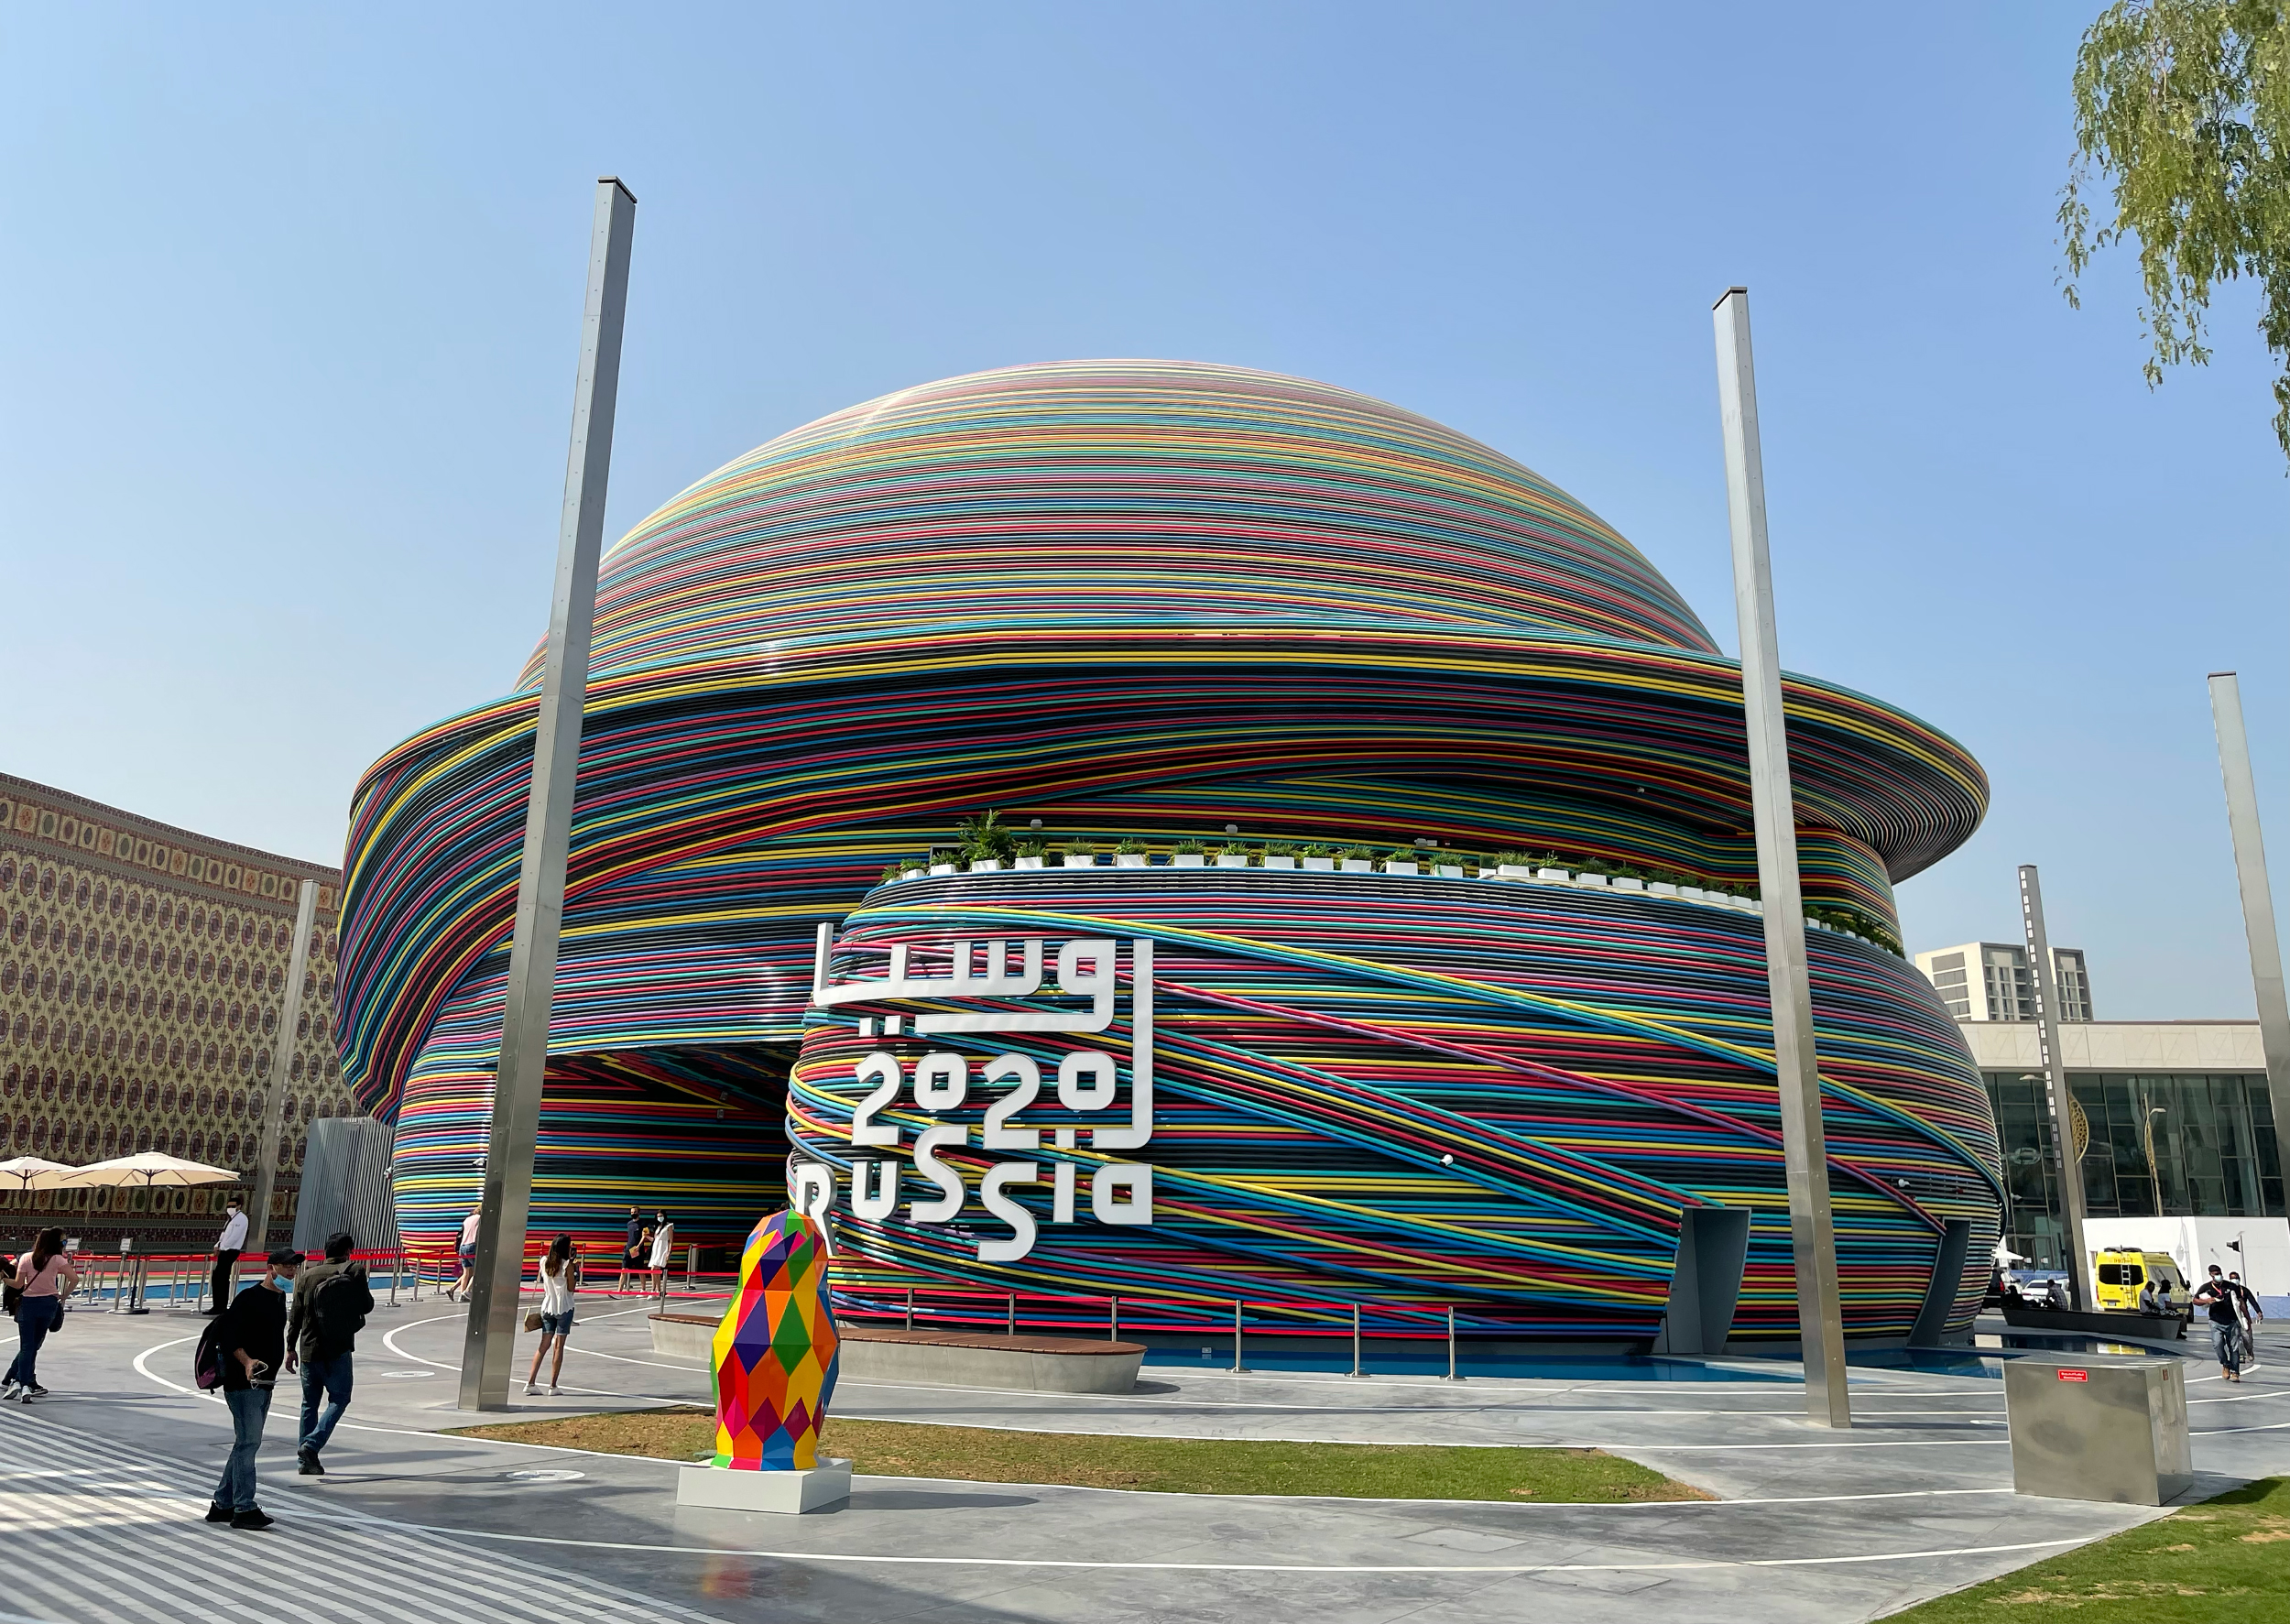 The Russia Pavilion is one of many attractions at Dubai’s Expo 2020, running until March 31.